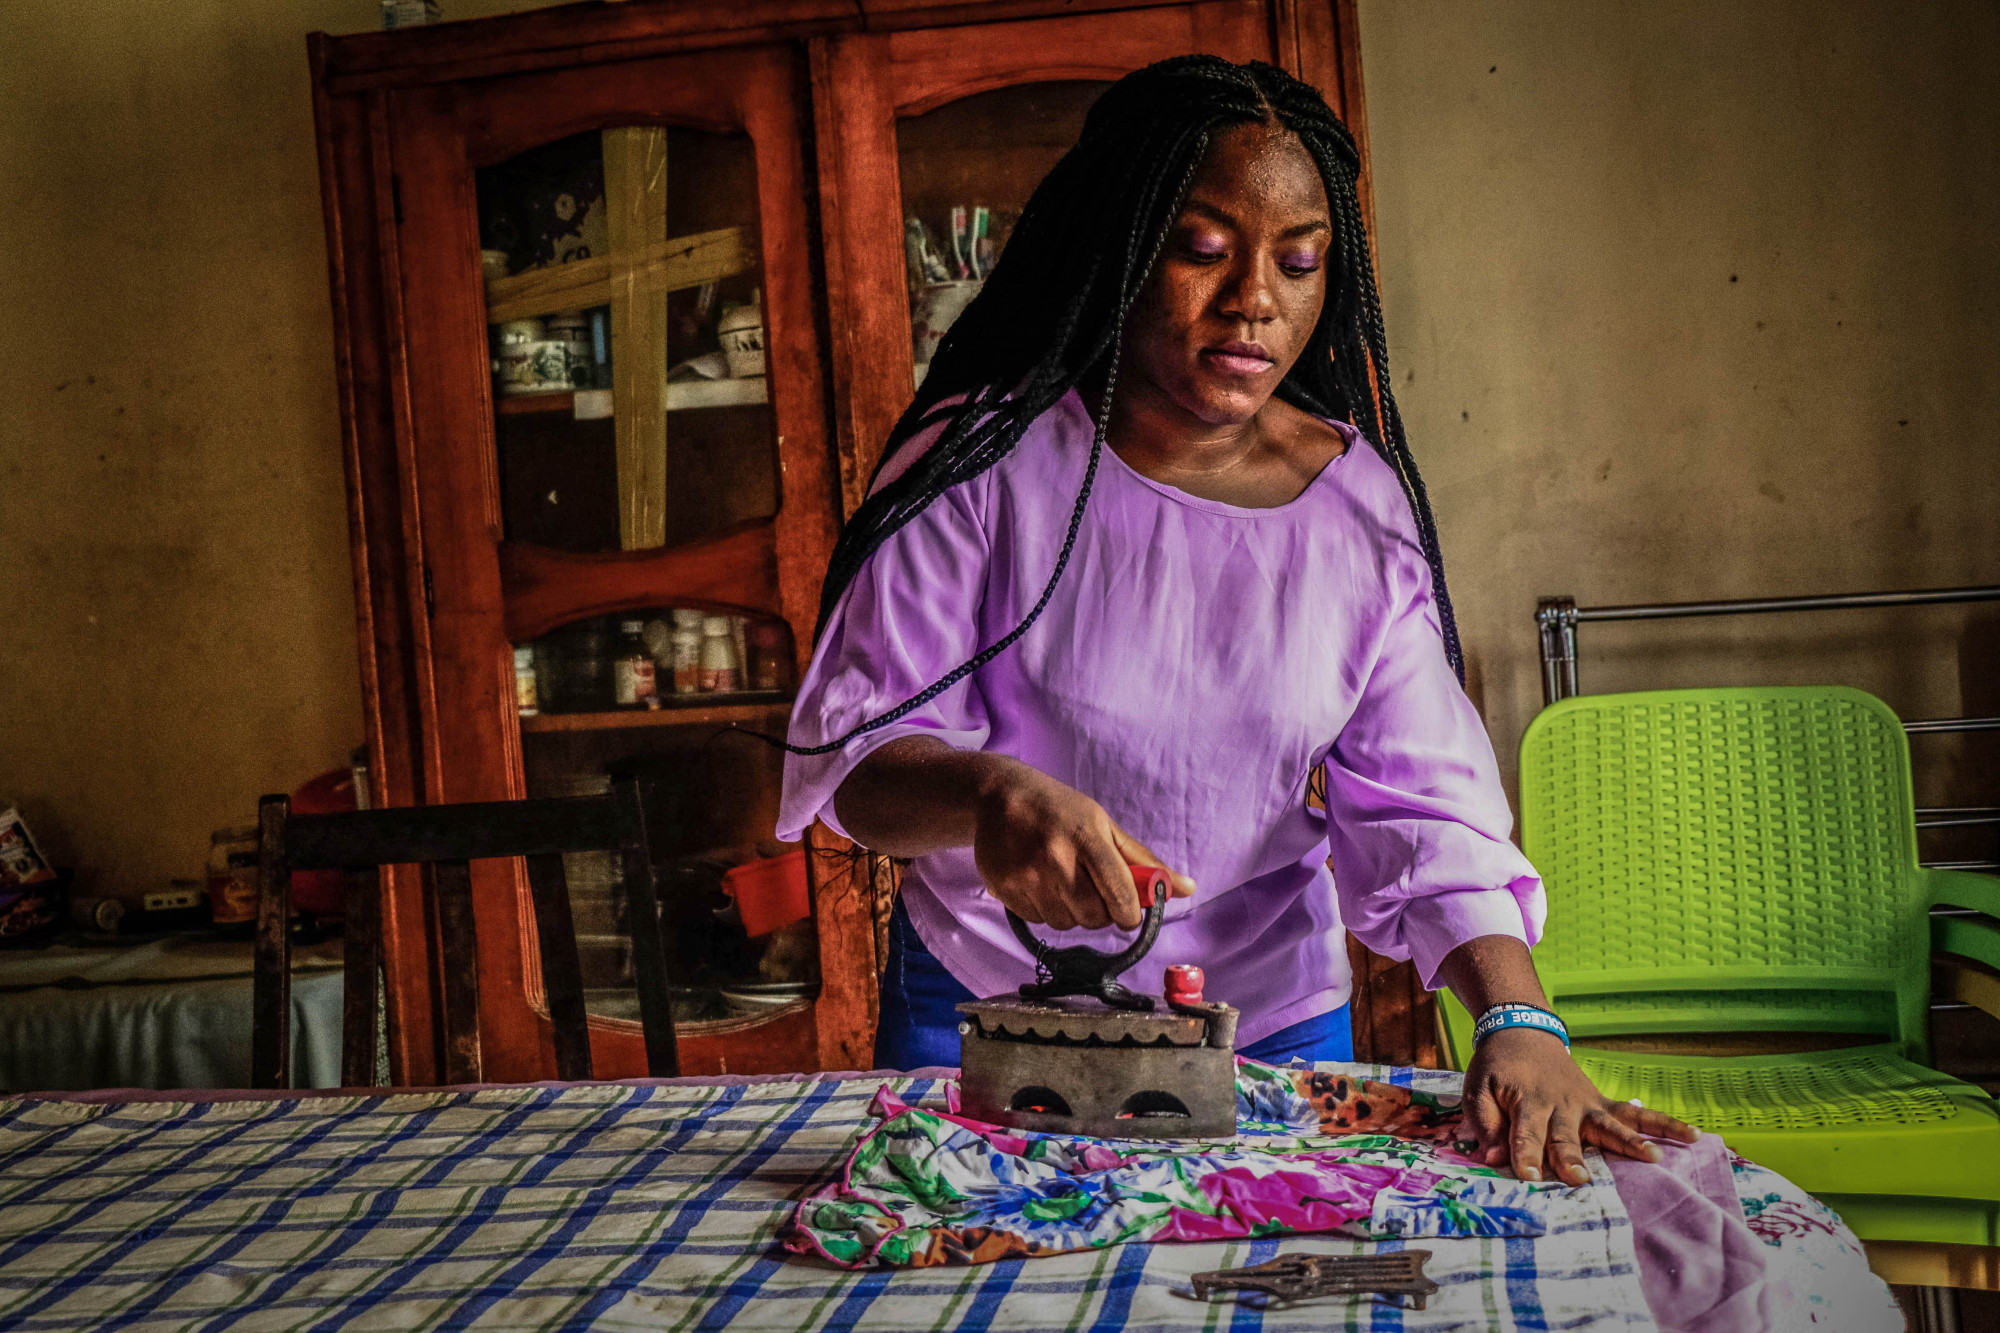 Kinshasa, DRC, May 2020 A woman named Laeticia uses a coal-heated iron to press clothing due to a lack of electricity in Kinshasa this month © Justin Makangara pour la Fondation Carmignac